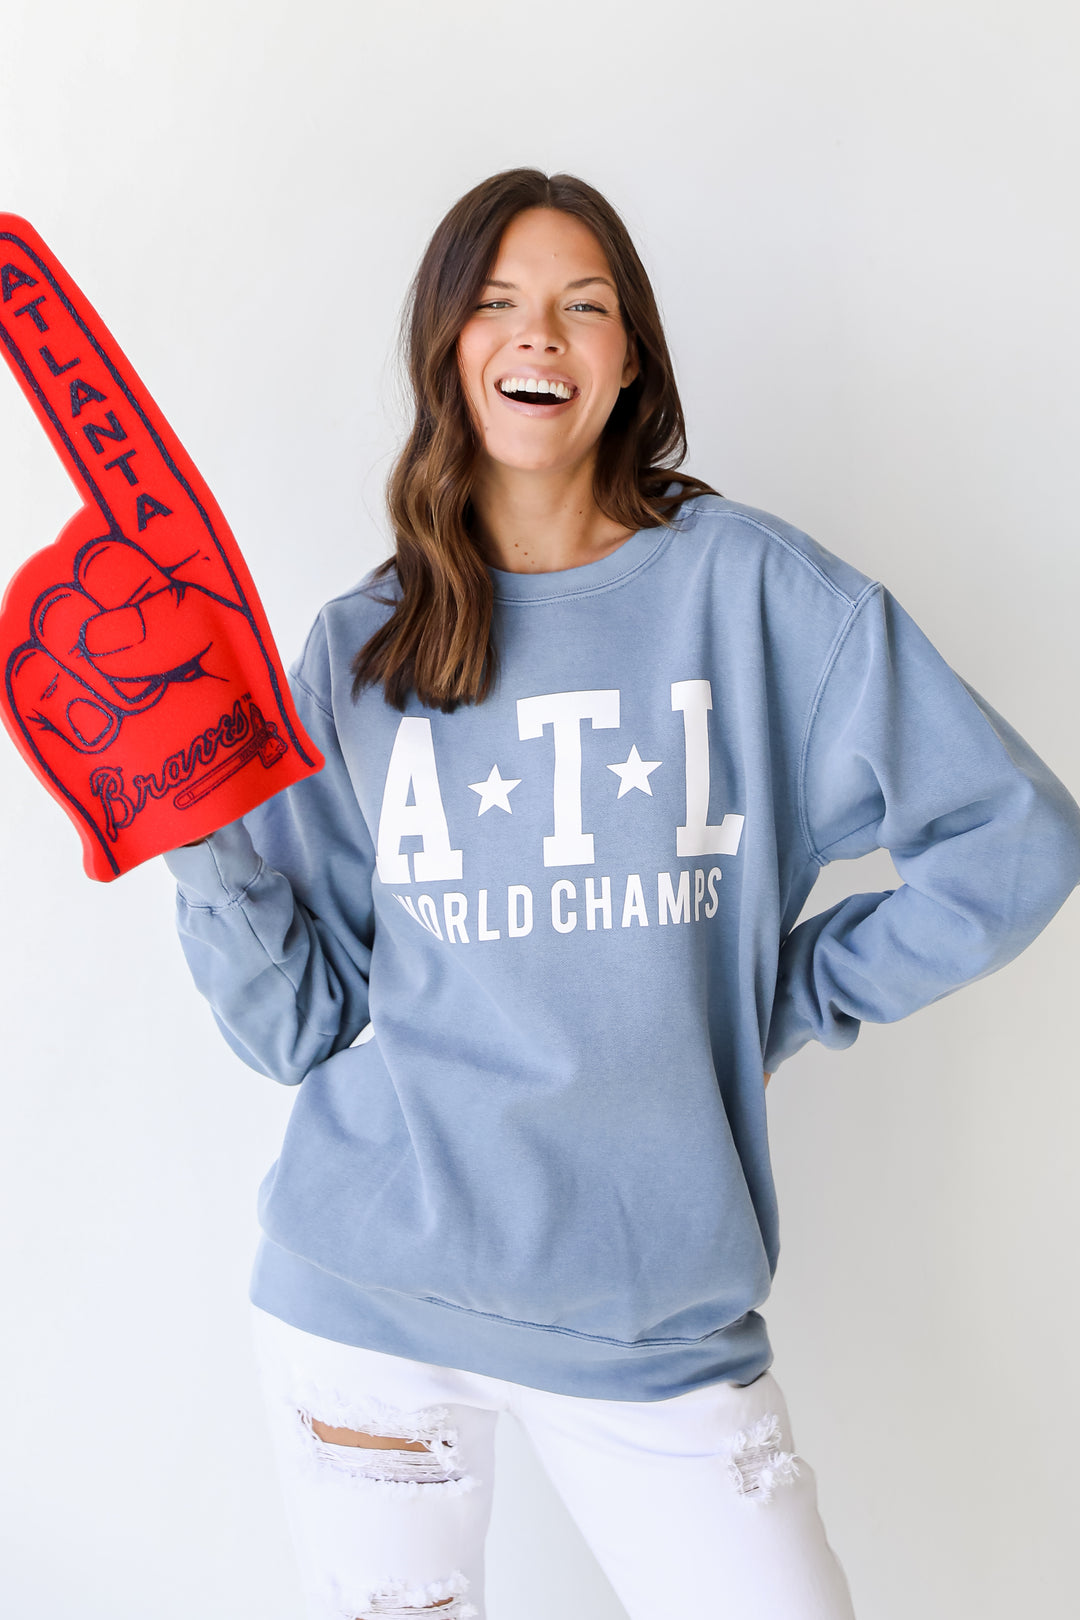 ATL World Champs Pullover. Braves Game Day Outfit. Braves Graphic Sweatshirt.